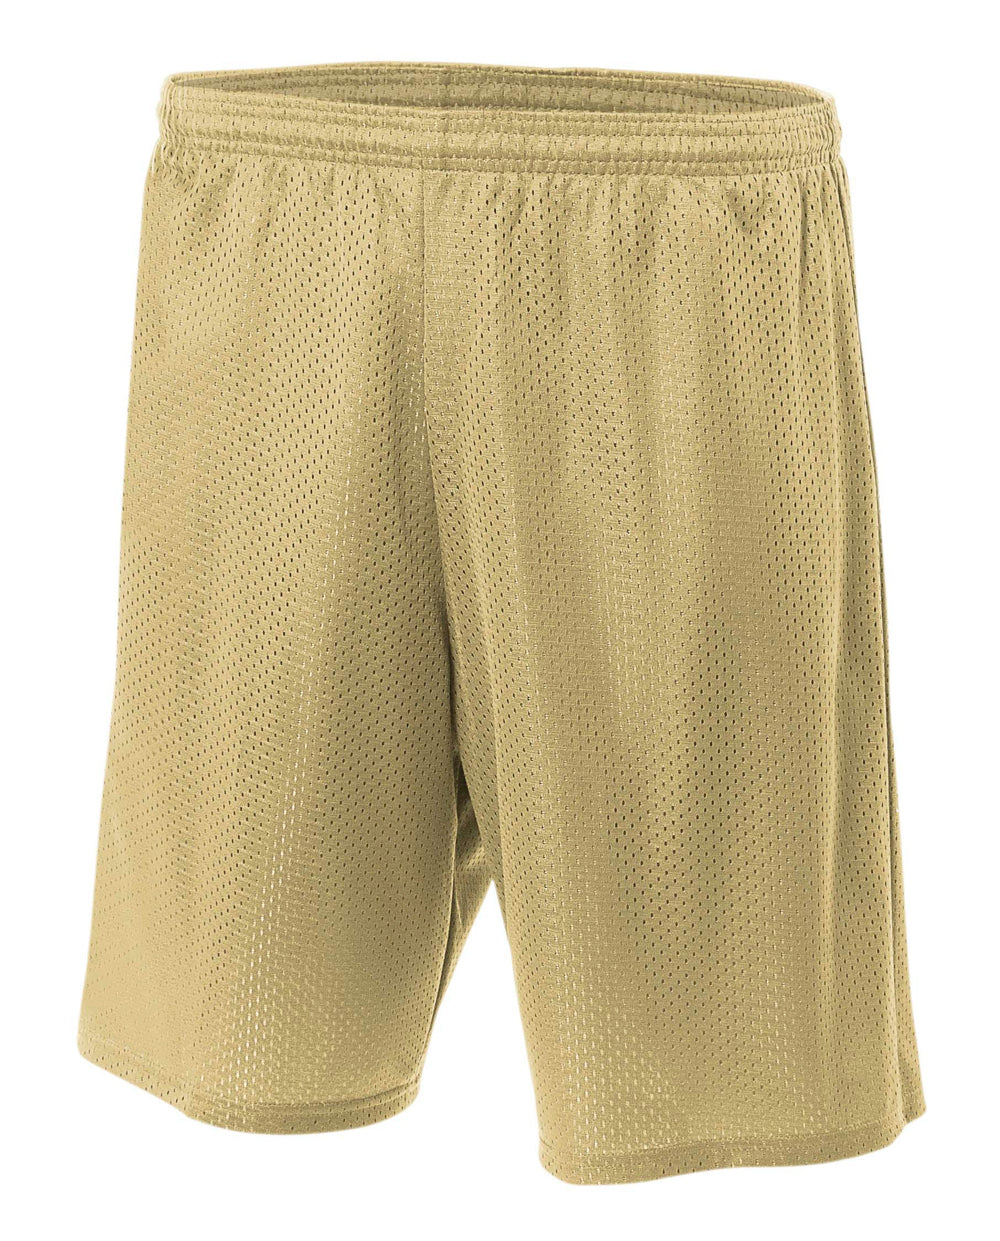 Vegas Gold A4 Lined Tricot Mesh Shorts